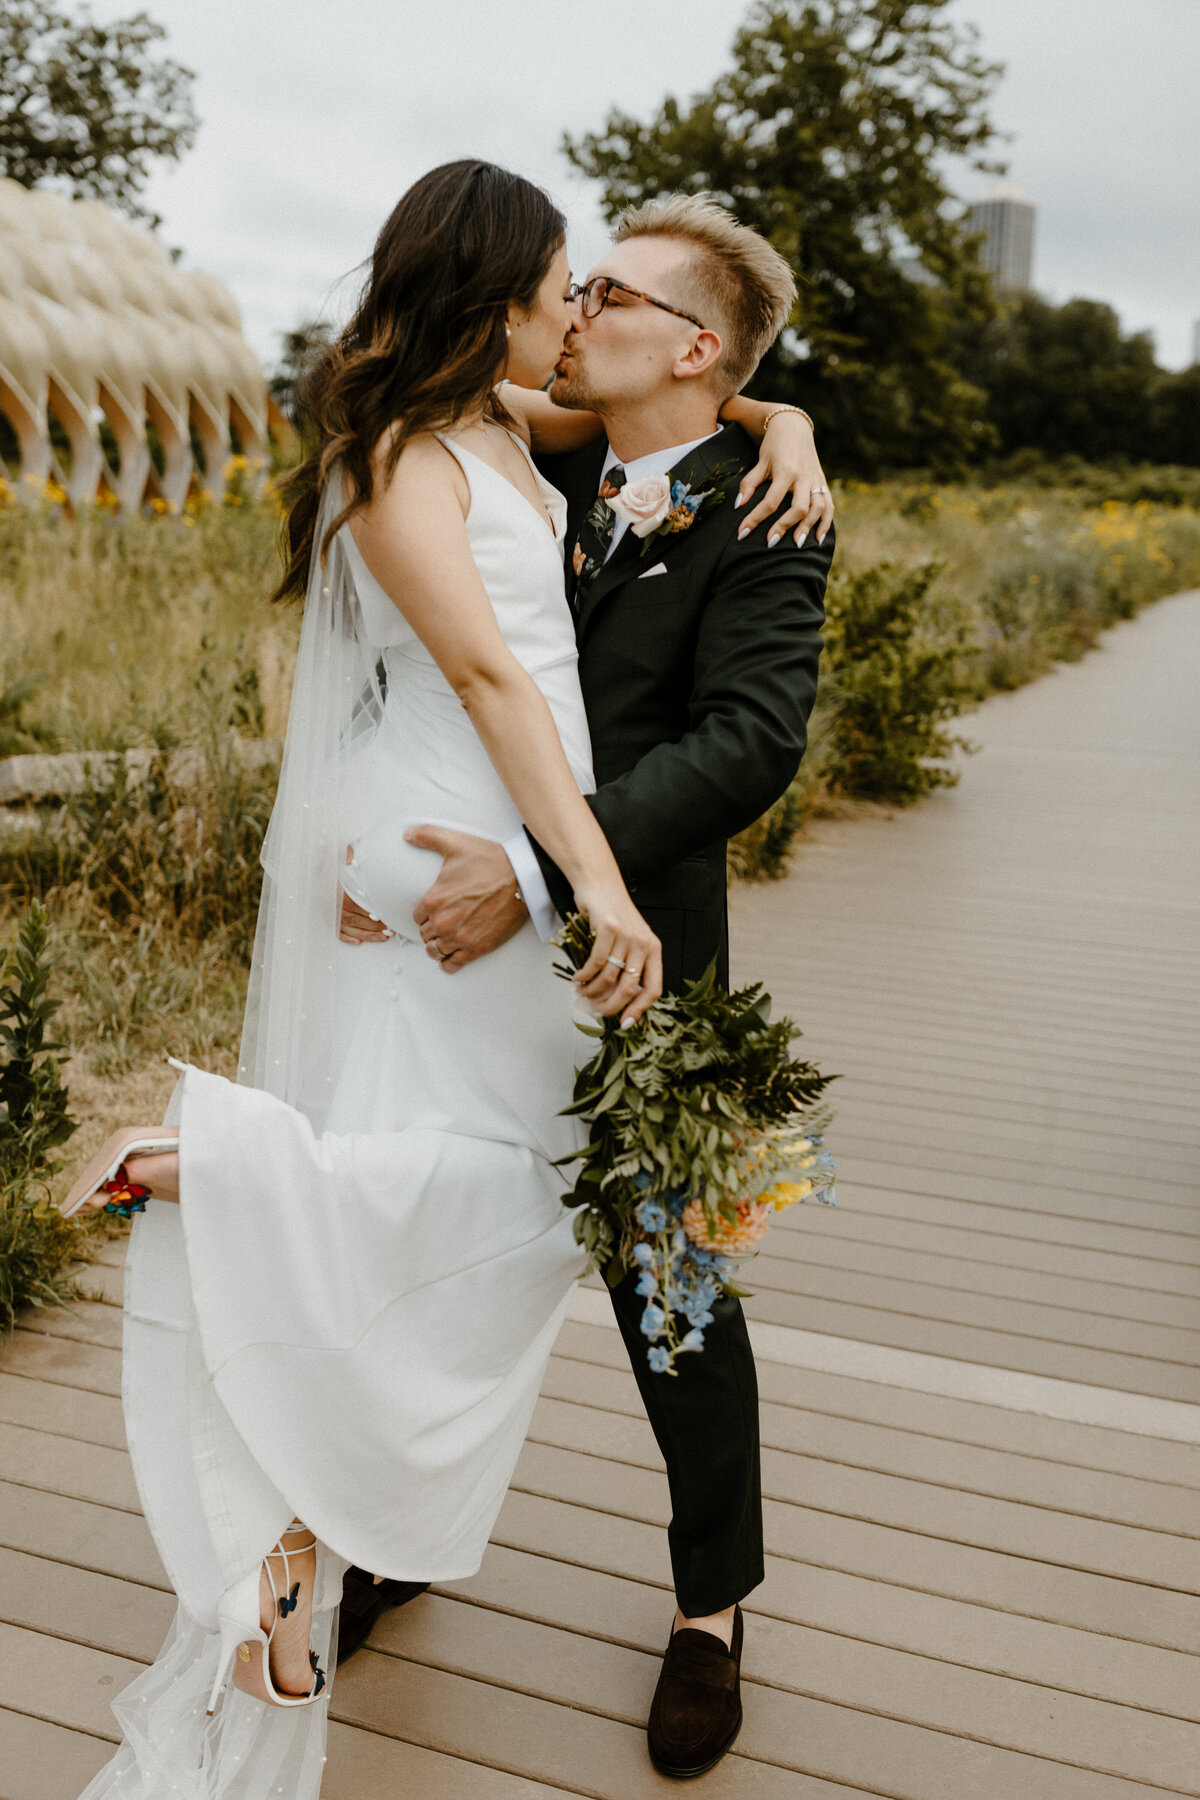 Julia-and-Keith-intimate-wedding-at-Parsons-in-Lincoln-Park-Chicago-92